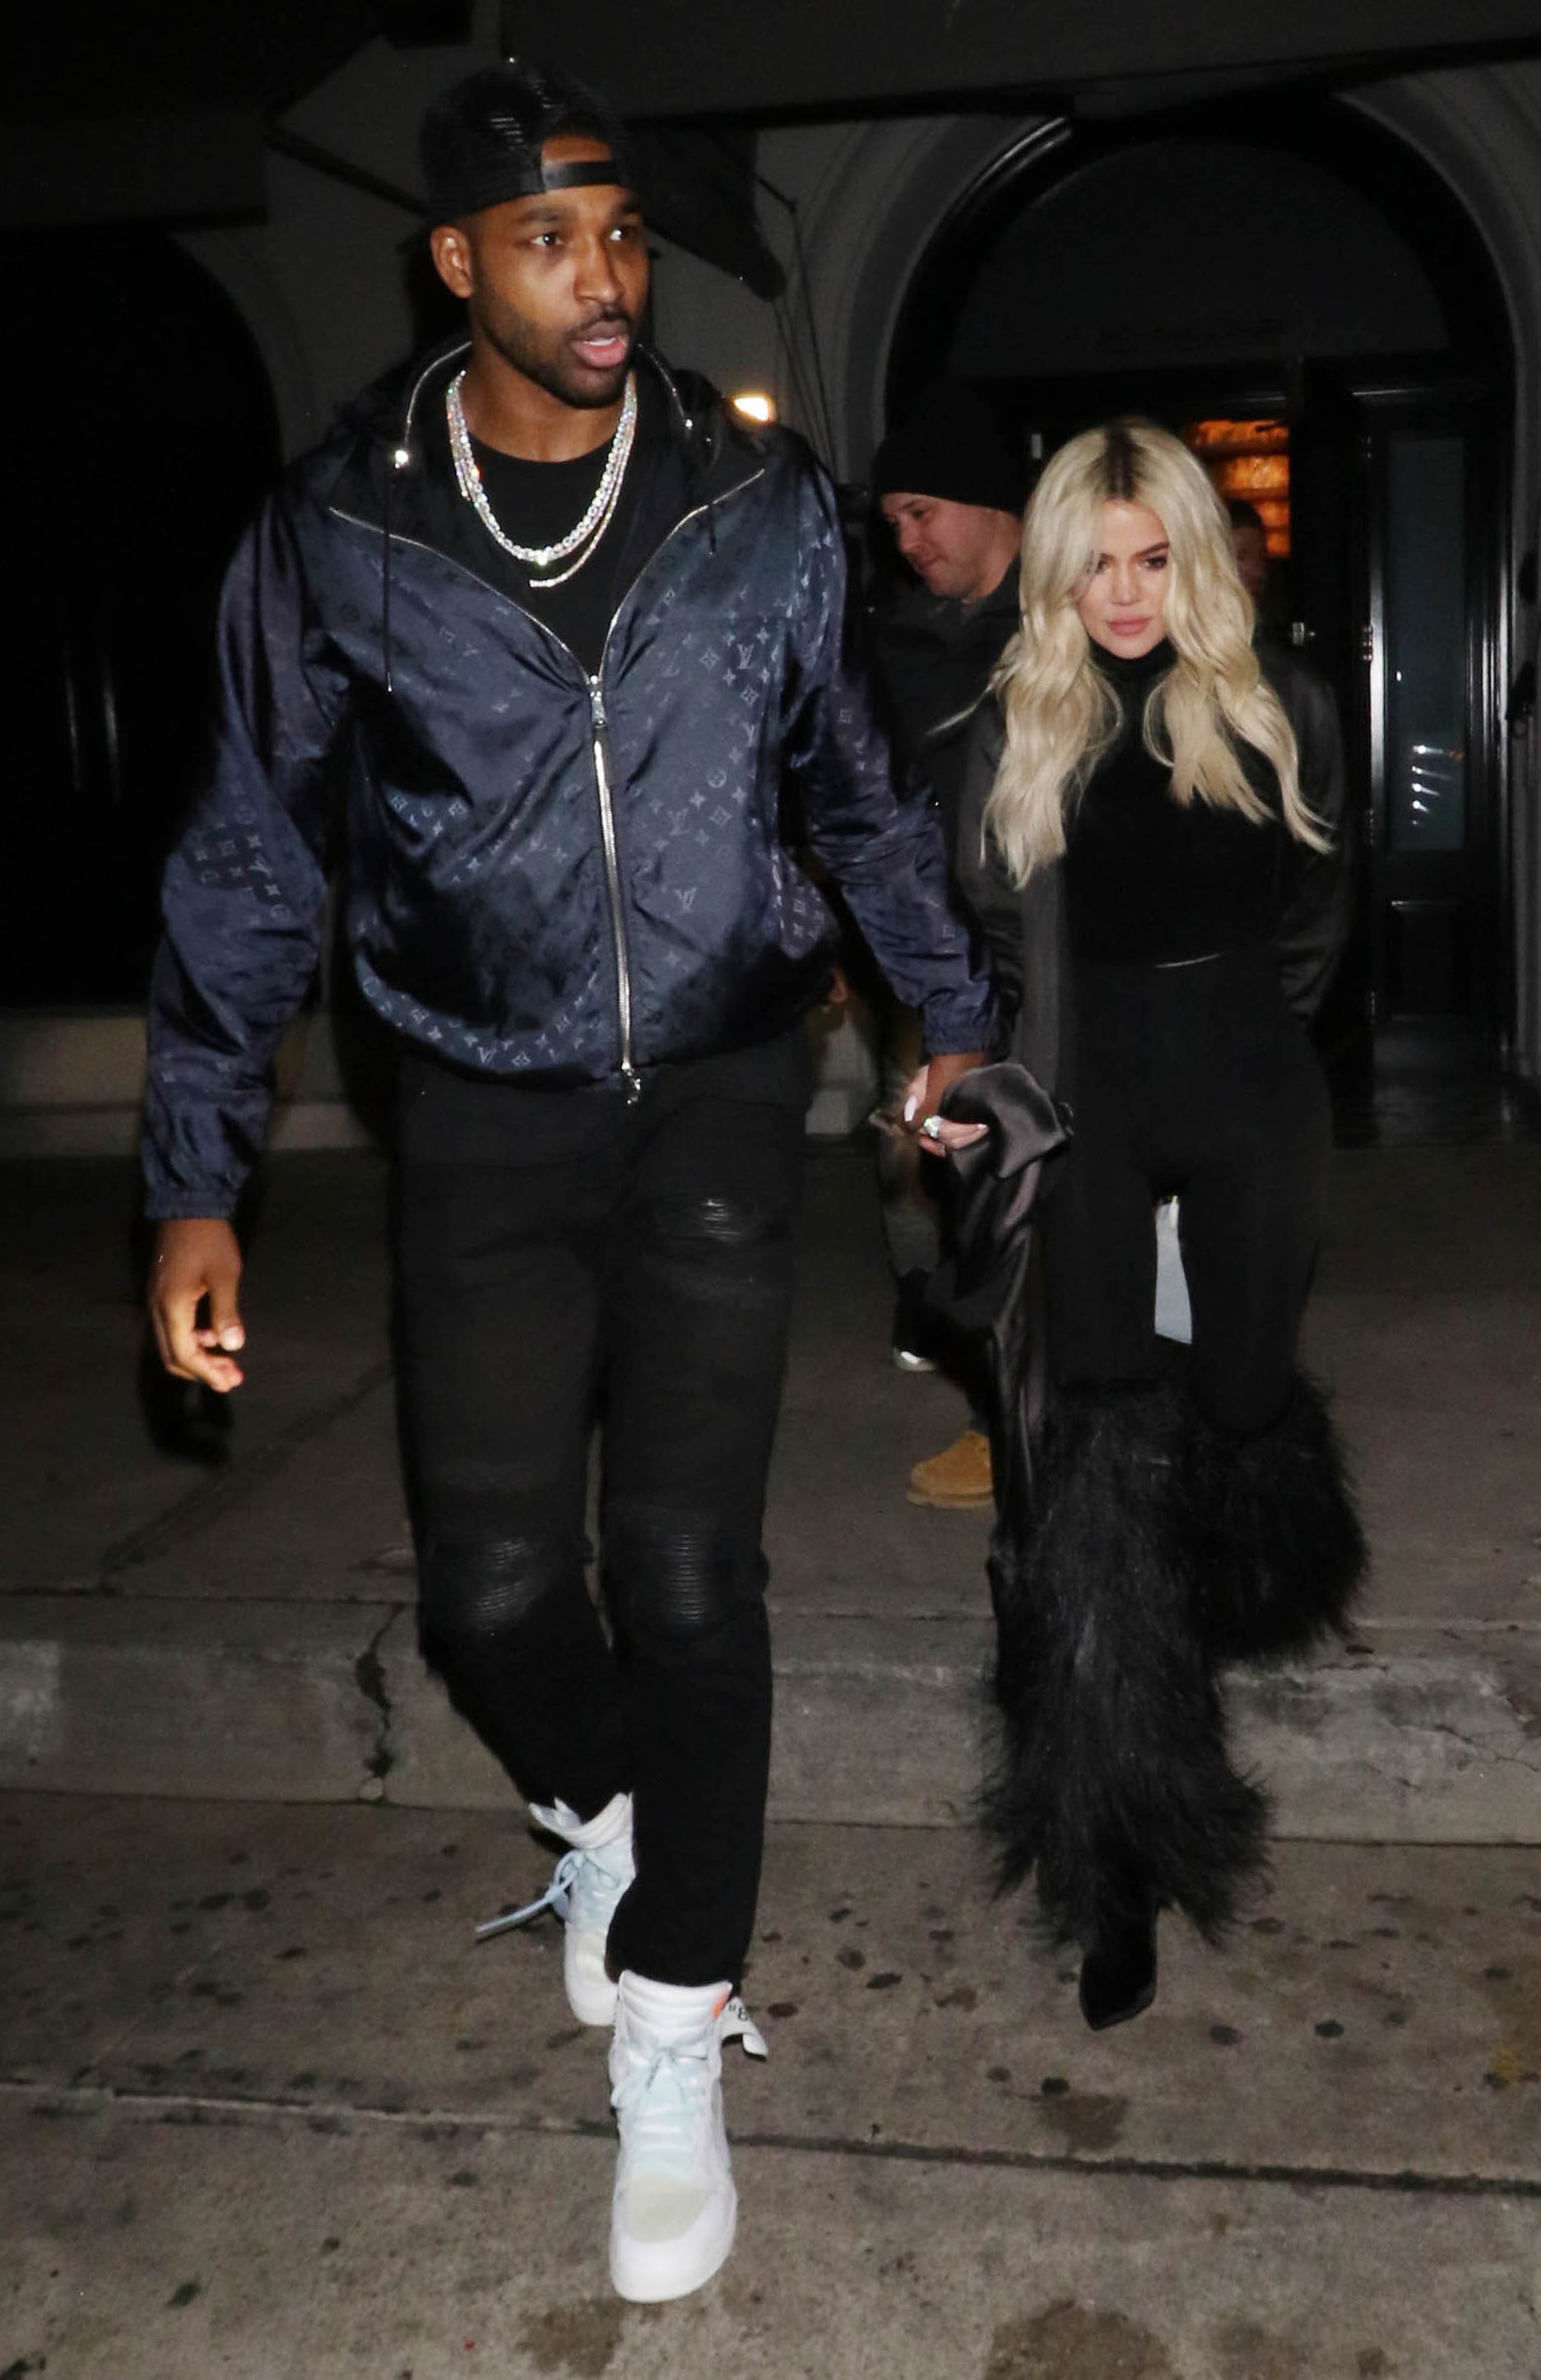 Khloé, Tristan and 'The Kardashians' lessons on healthy relationships